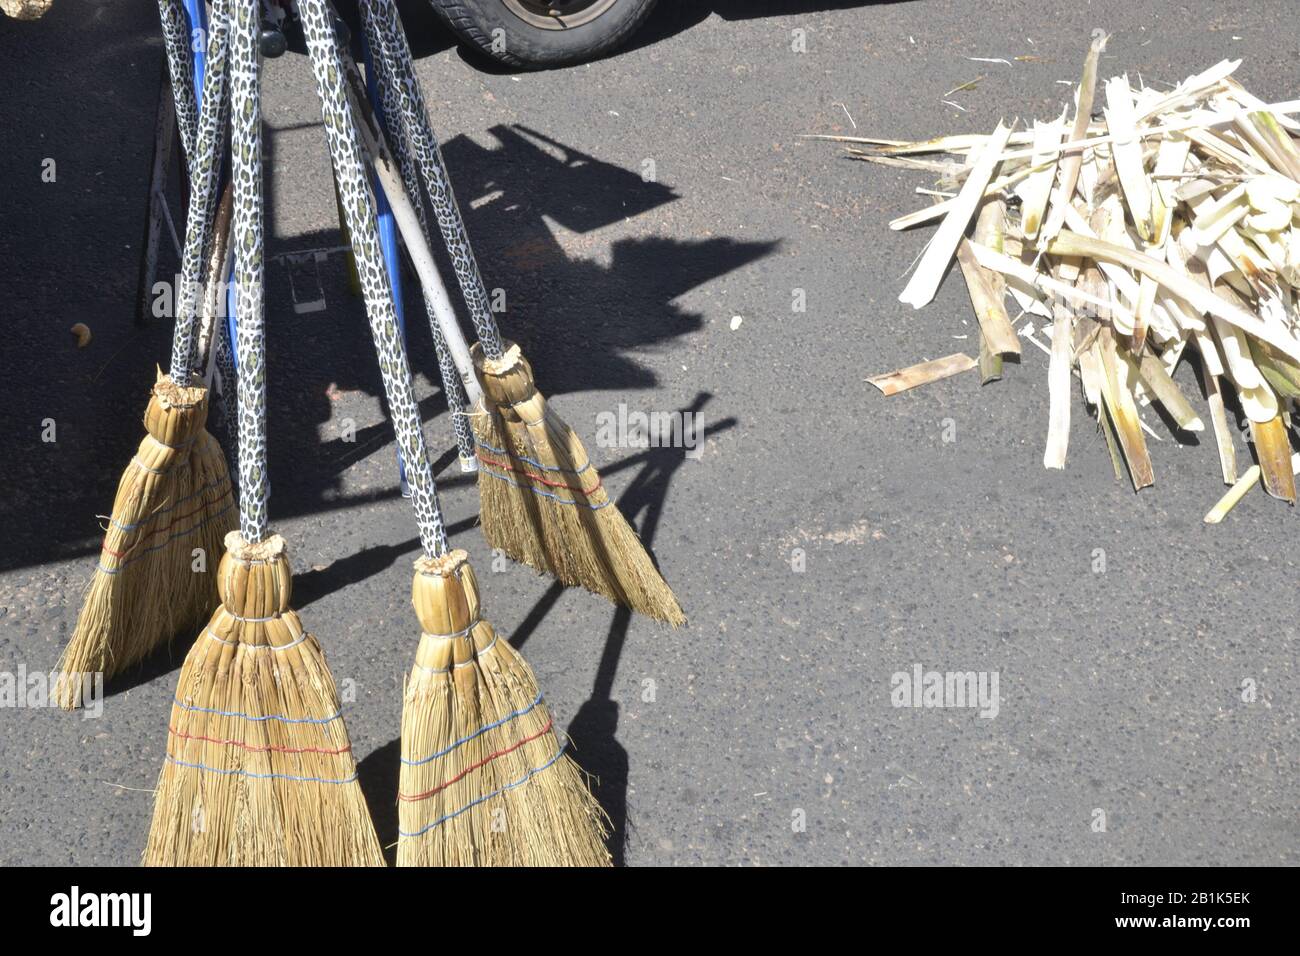 Straw broom also known as piassava on sale at a street fair in Brazil, South America, cheap and widely used broom Stock Photo